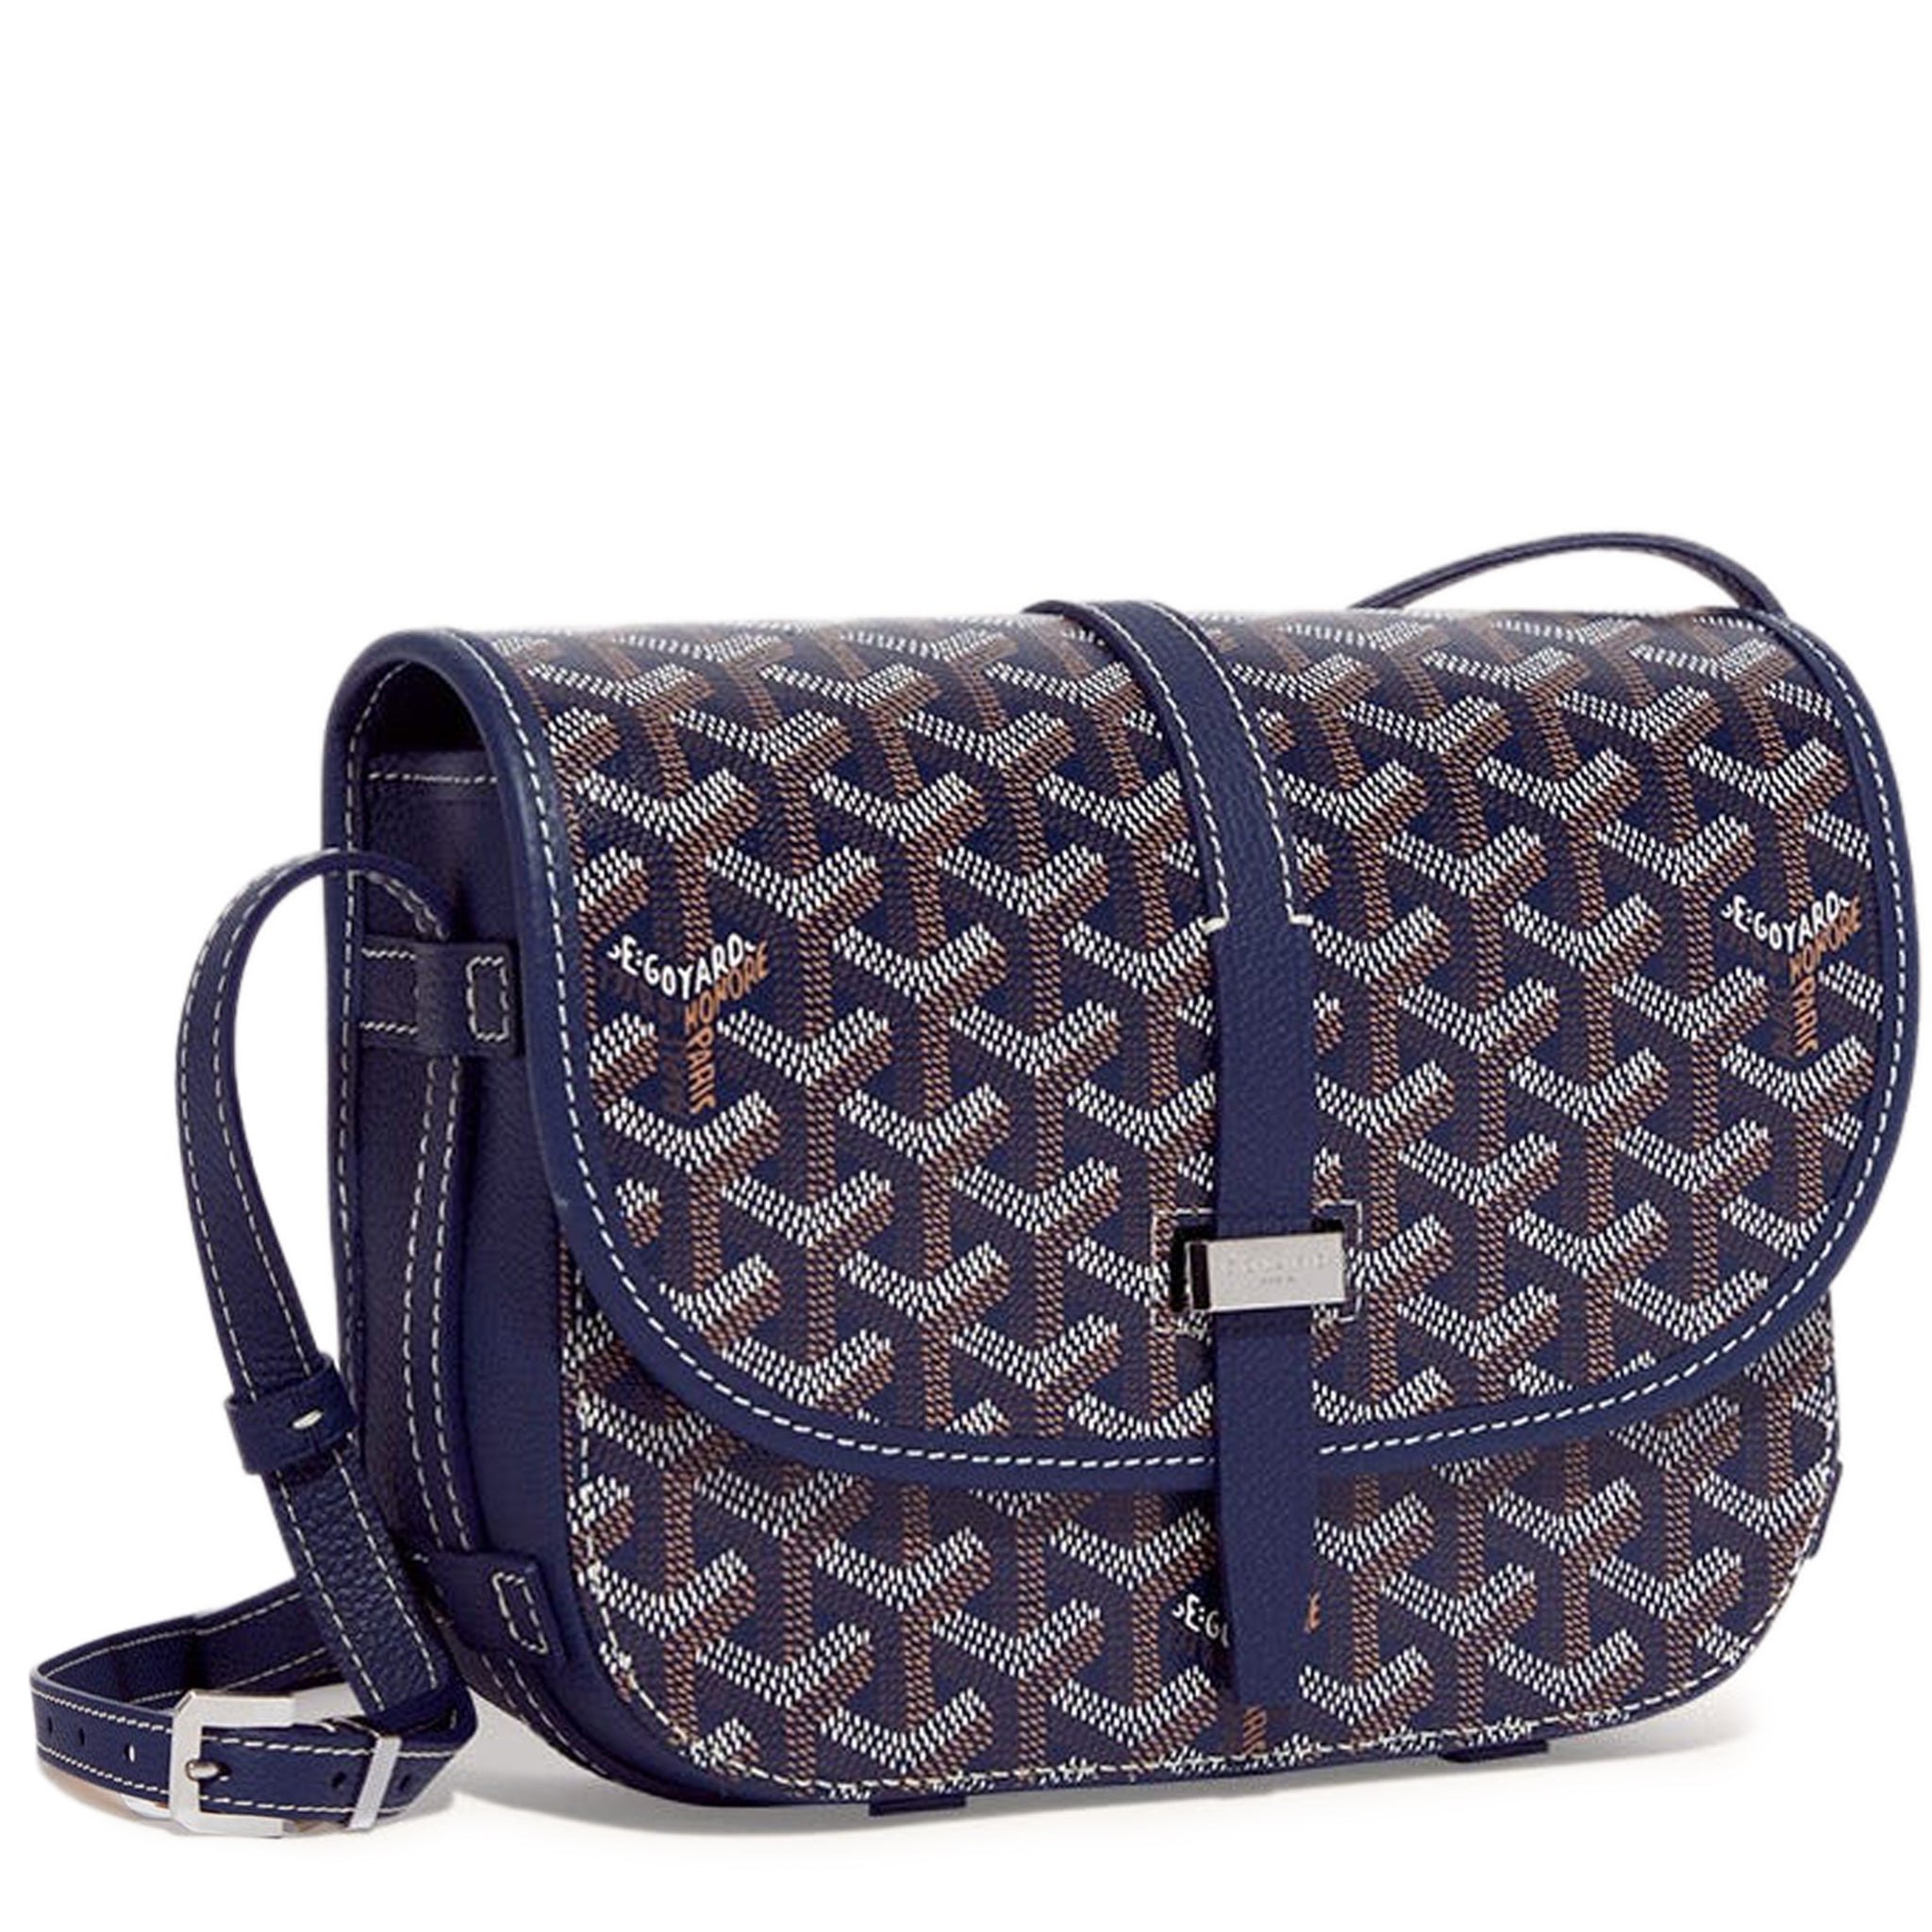 Shop Blue Goyard Bags Women Messenger with great discounts and